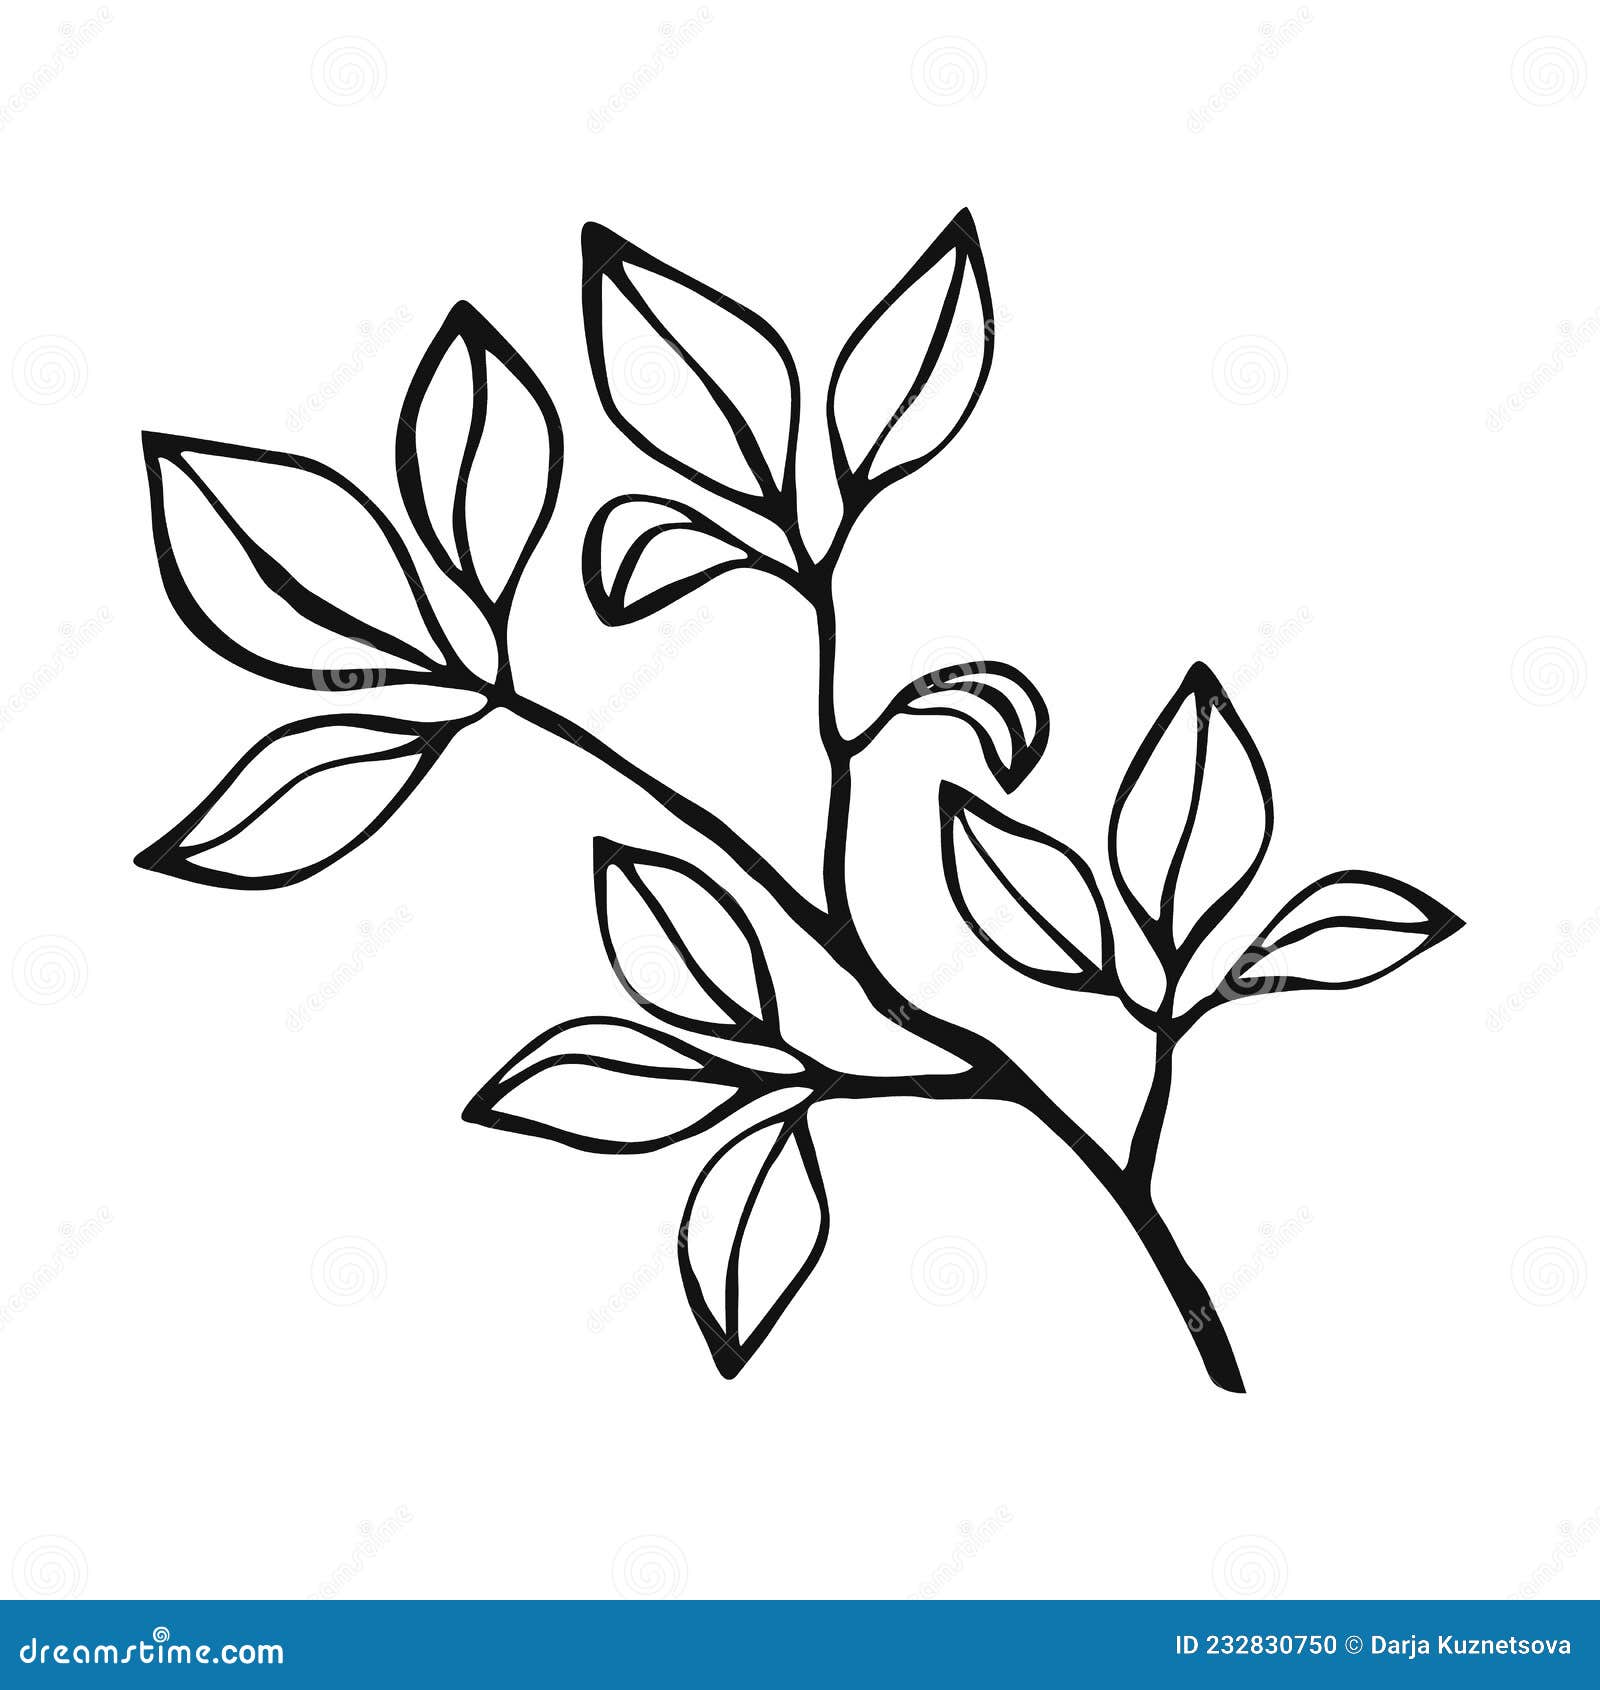 Hand Drawn Plants Outline. Floral and Leave Element Stock Vector ...